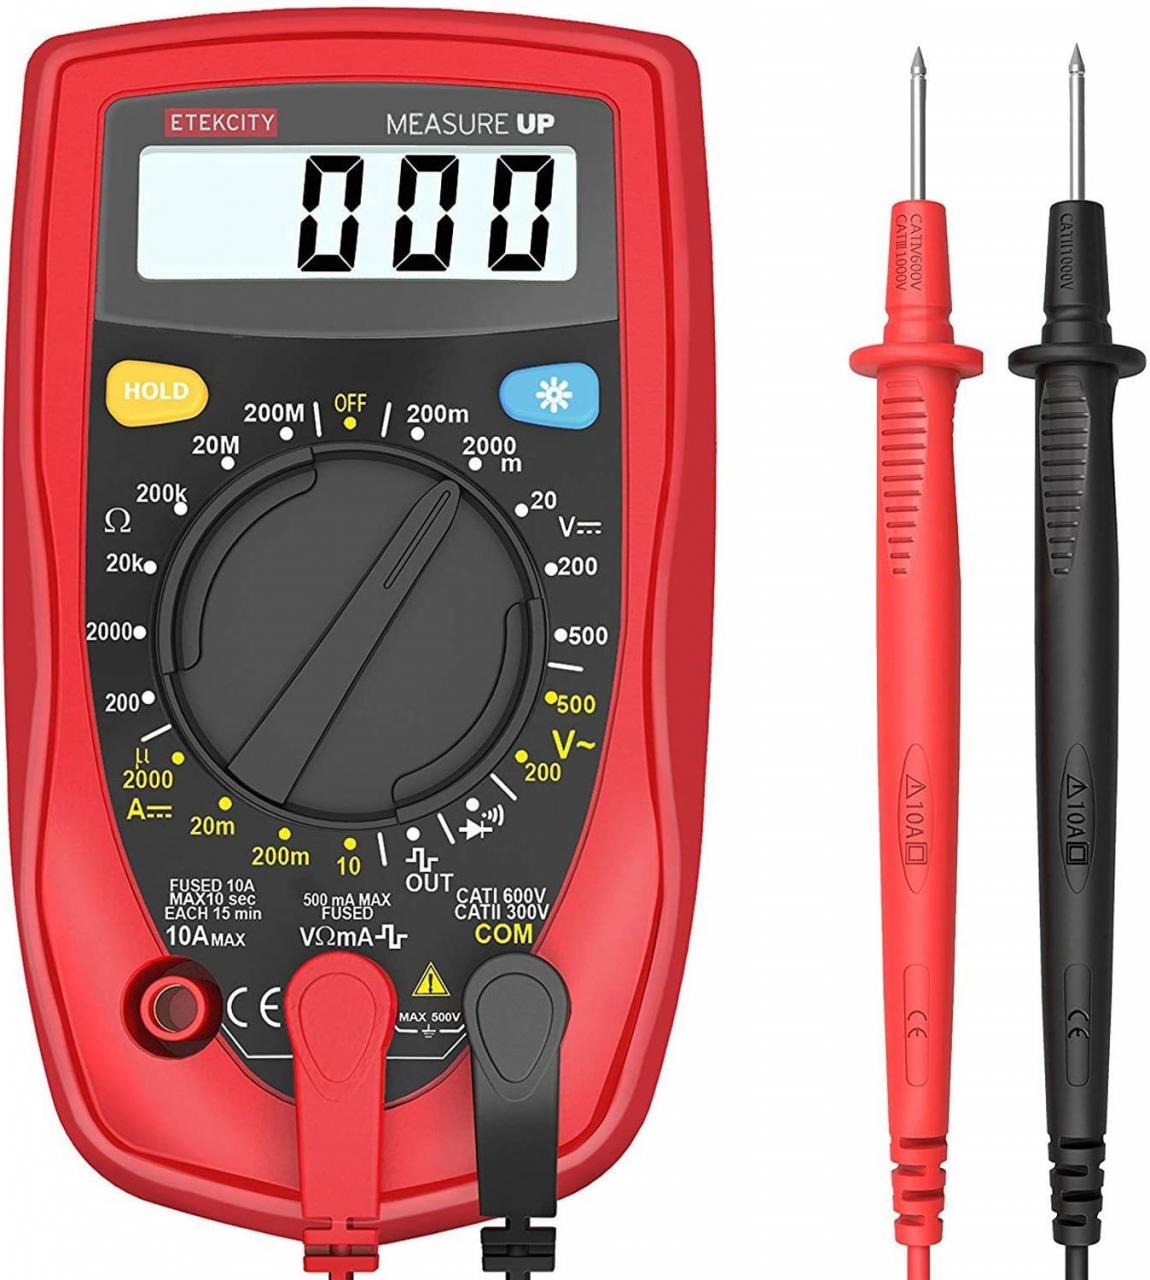 Etekcity MSR-R500 Digital Multimeter , Electronic Volt Amp Ohm Meter with  Diode and Continuity Test, Backlight LCD Display (Red) 【Etekcity】 价格报价图片-  亚马逊中国